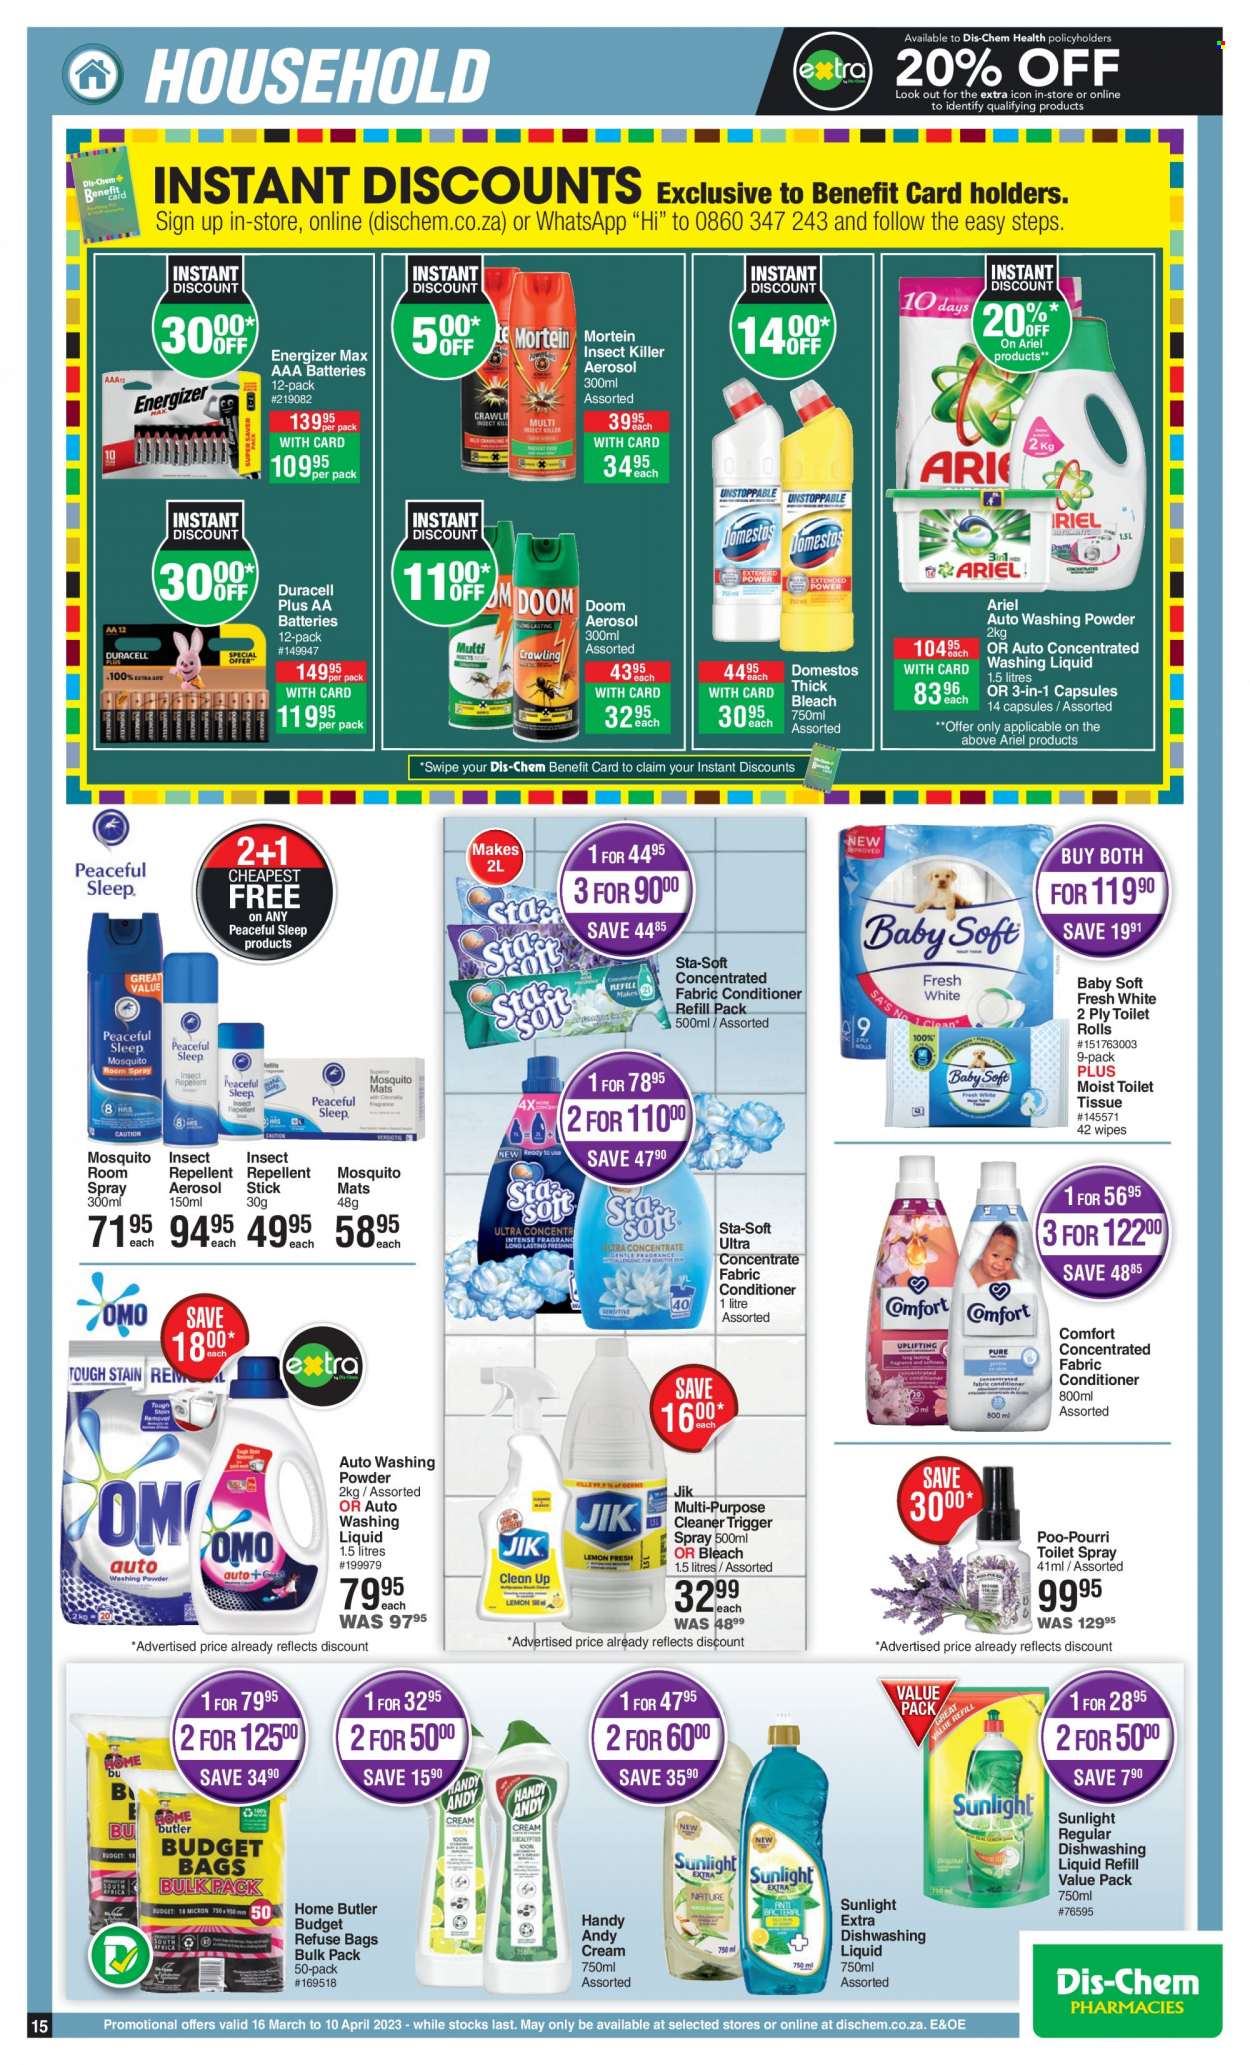 thumbnail - Dis-Chem catalogue  - 16/03/2023 - 10/04/2023 - Sales products - wipes, Baby Soft, toilet paper, Domestos, bleach, cleaner, Mortein, Ariel, thick bleach, laundry powder, Sunlight, dishwashing liquid, refuse bag, repellent, insect killer. Page 15.